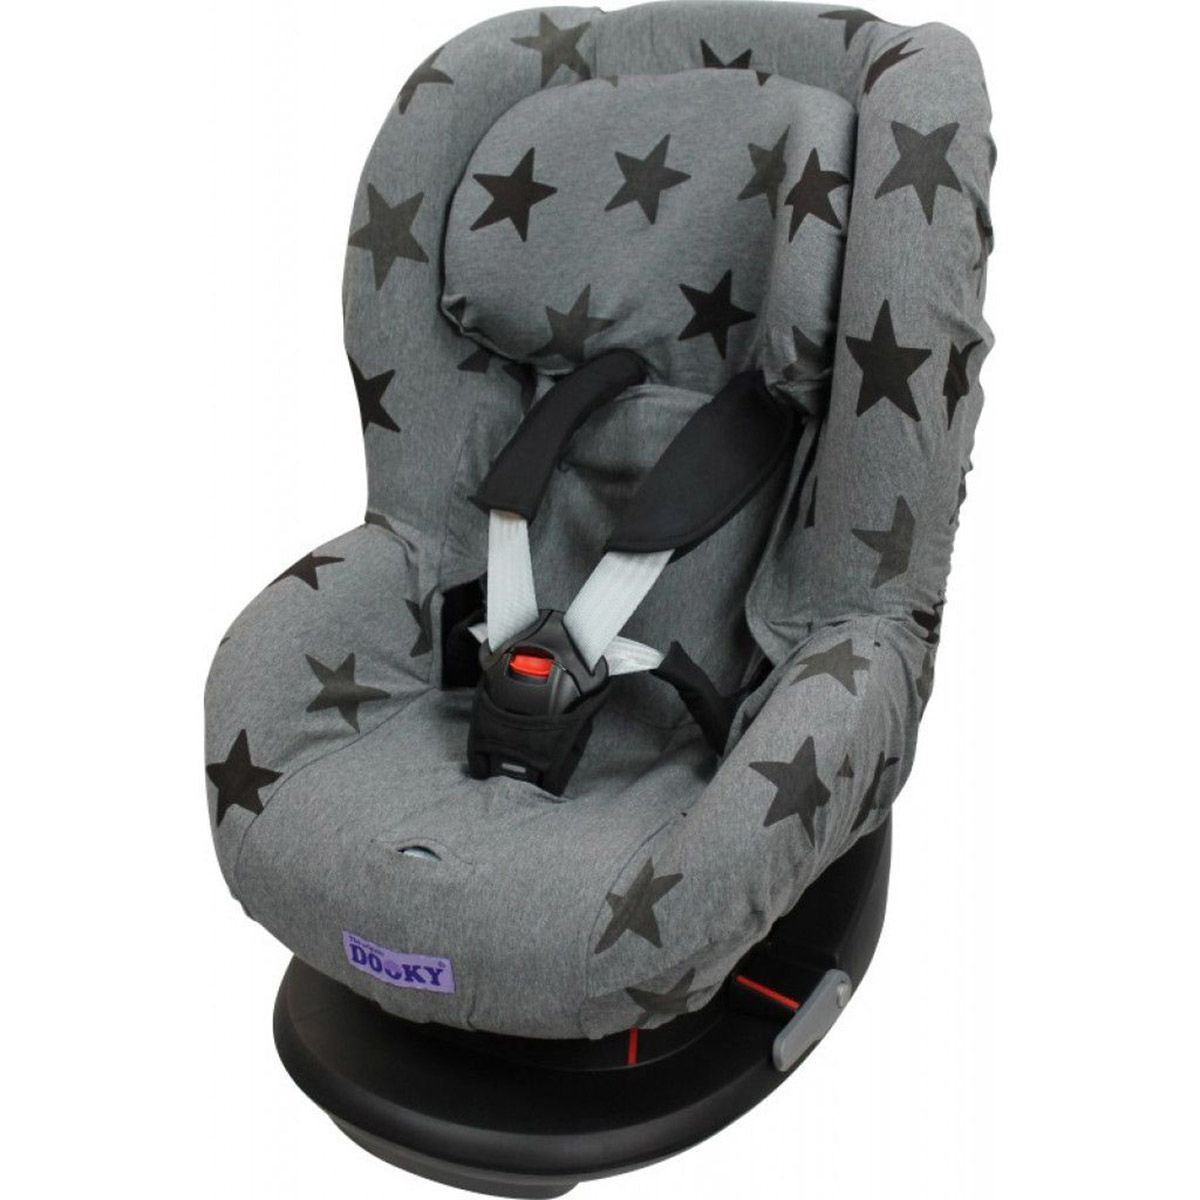 Dooky Seat Cover Groep 1+ - Grey Star